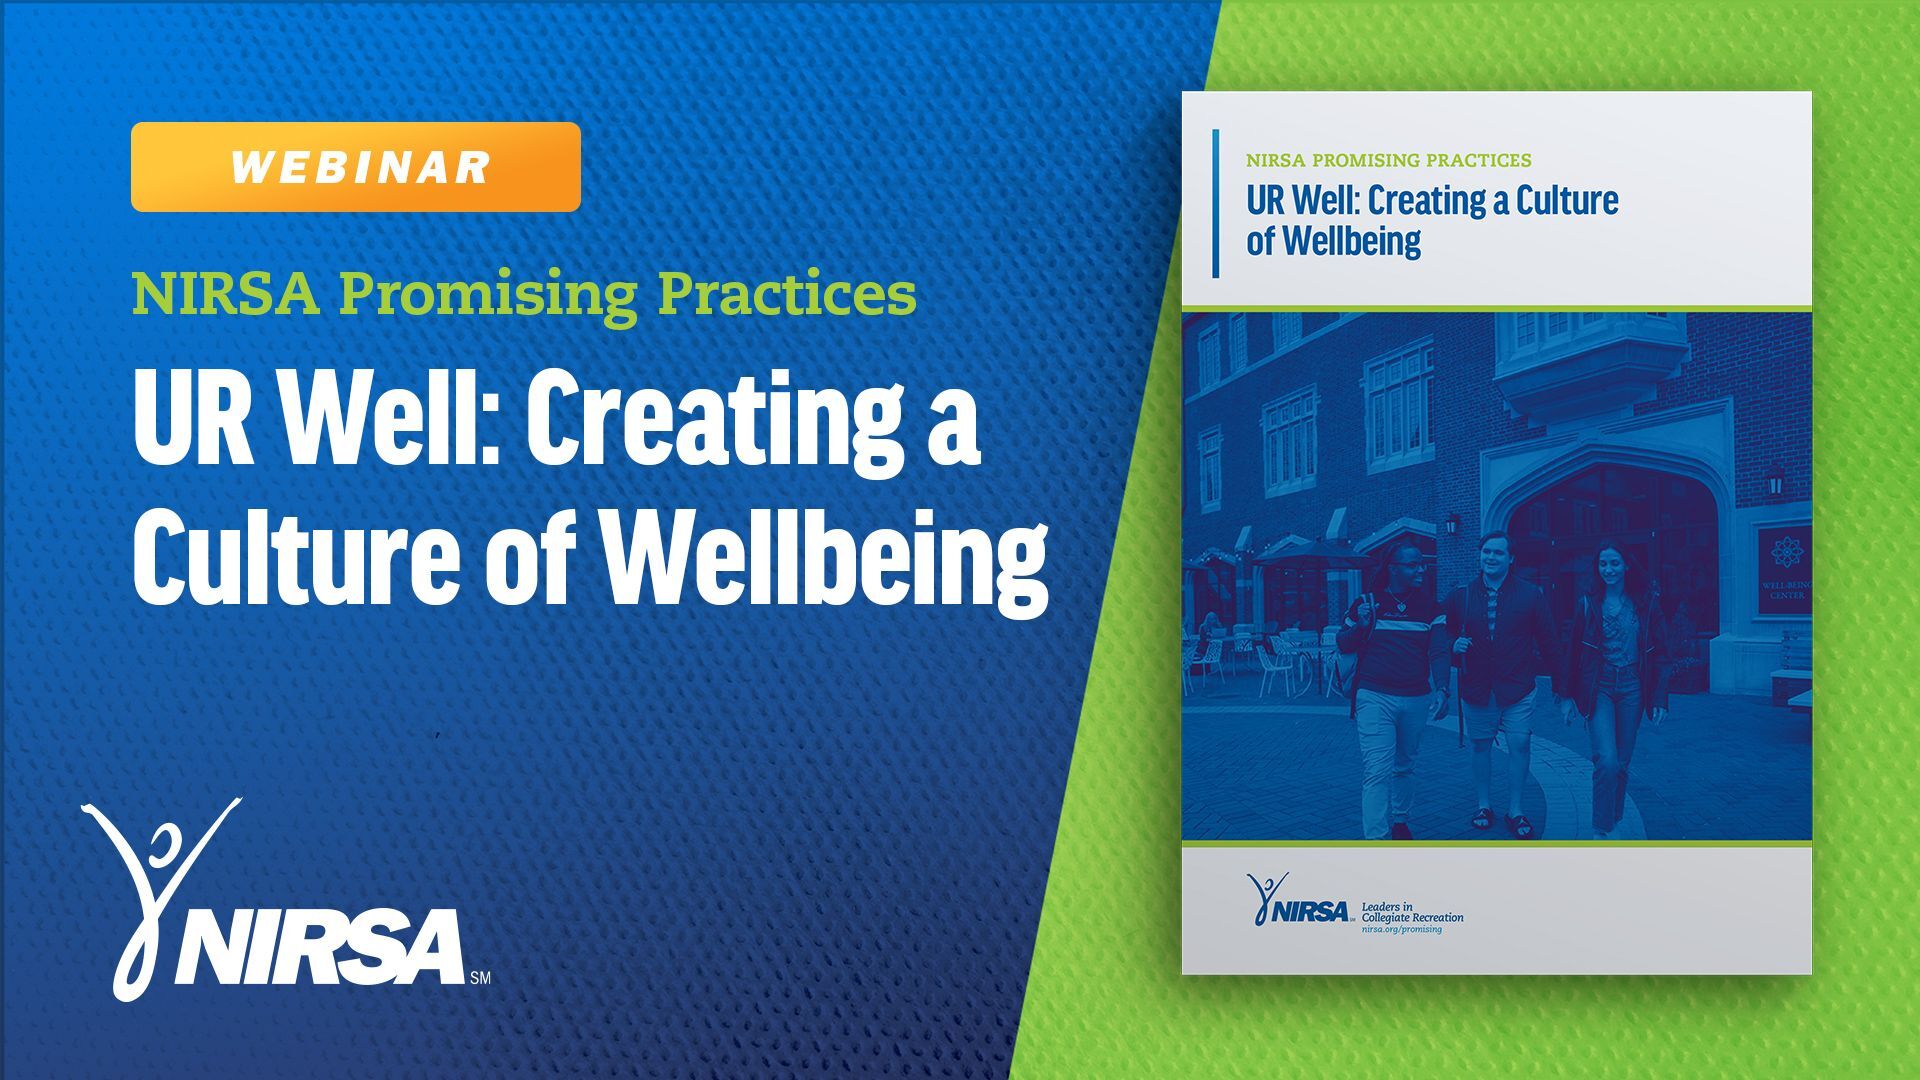 UR Well: Creating a Culture of Wellbeing